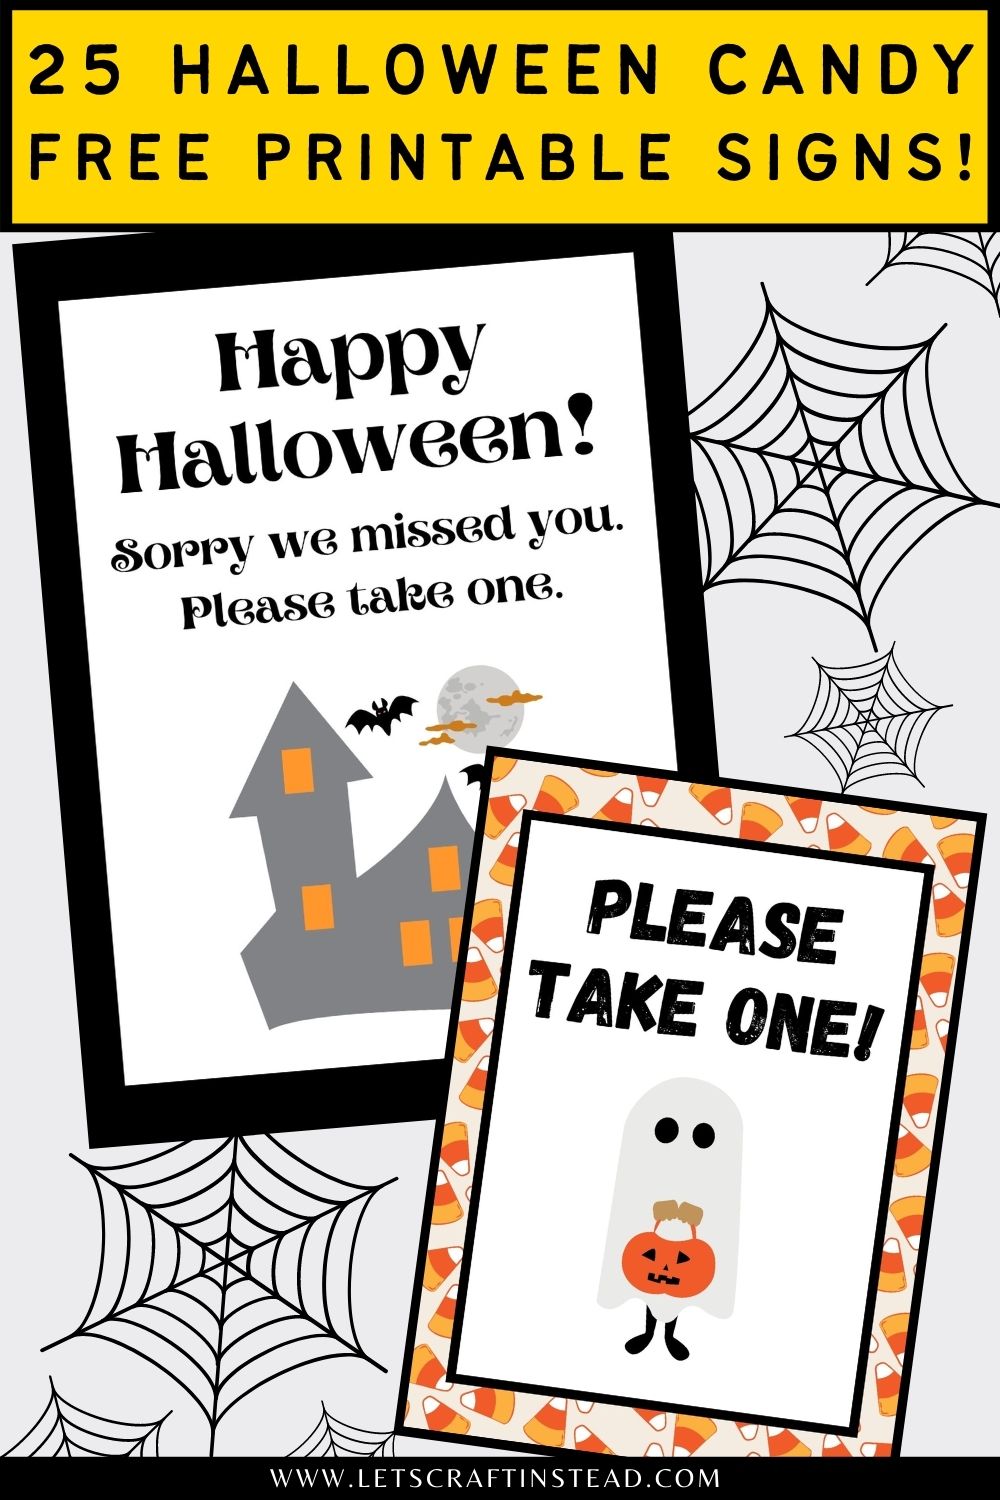 25-free-printable-halloween-candy-signs-you-can-download-instantly